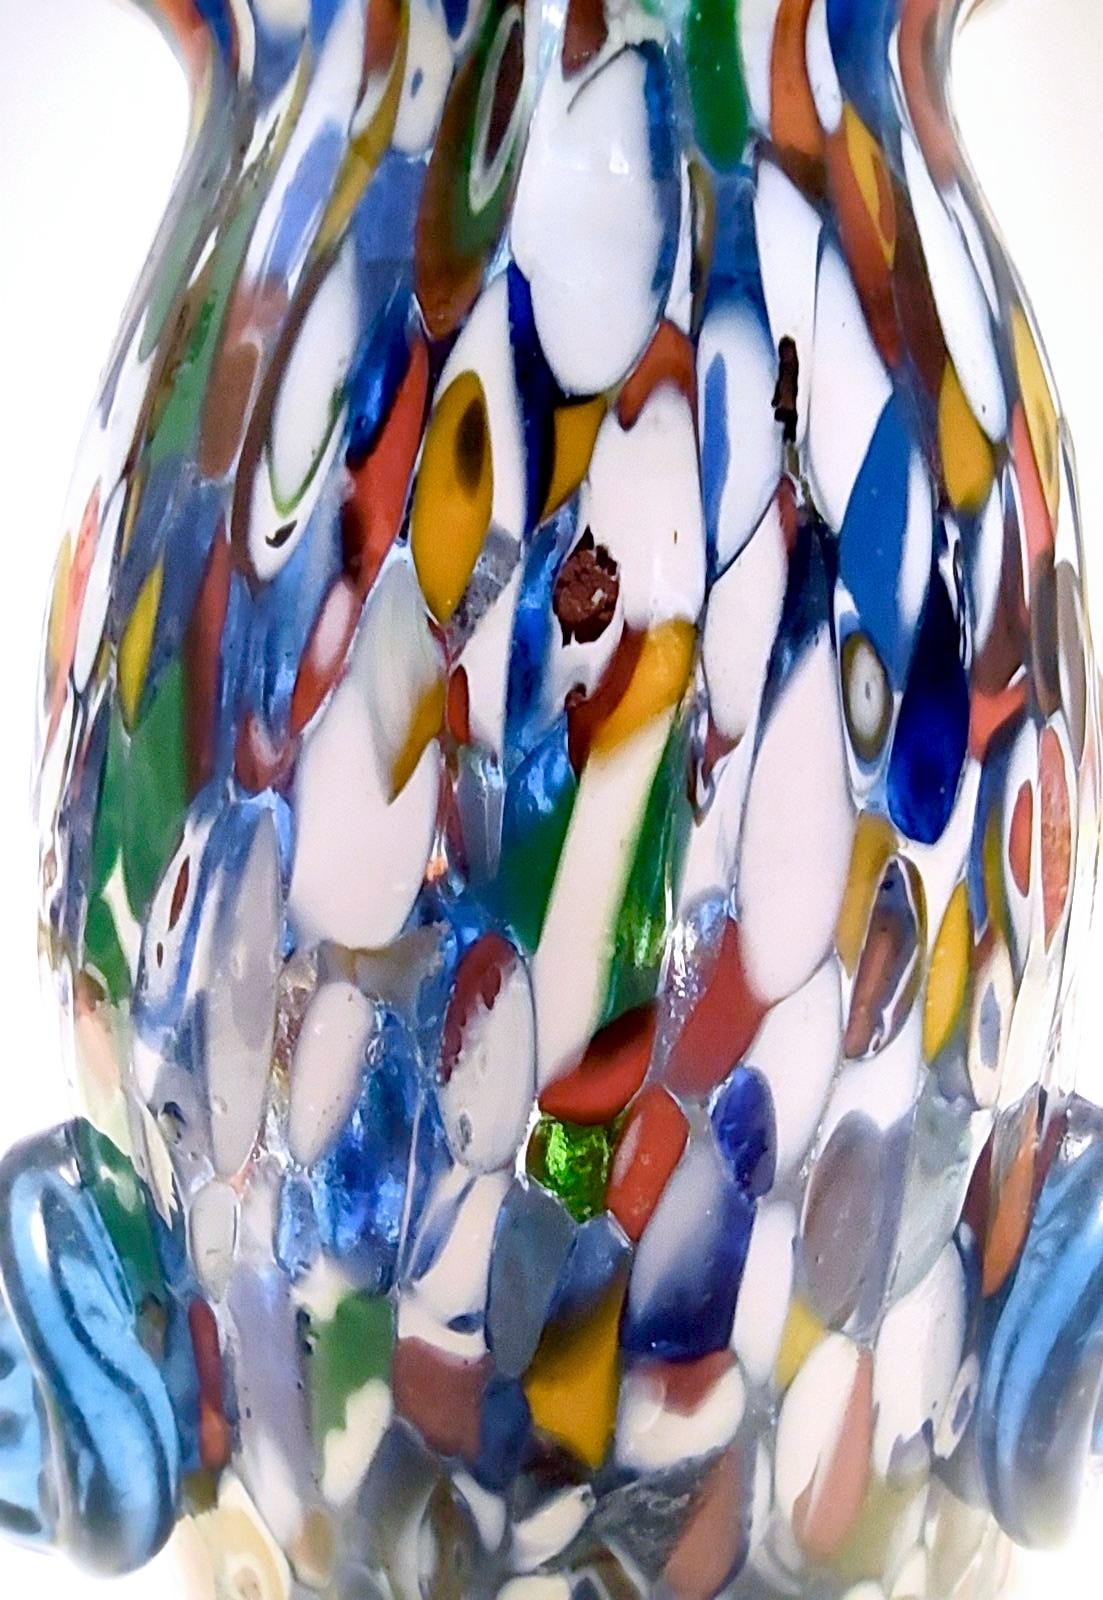 Vintage Murano Glass Vase Attributed to Fratelli Toso with Murrines, Italy For Sale 3